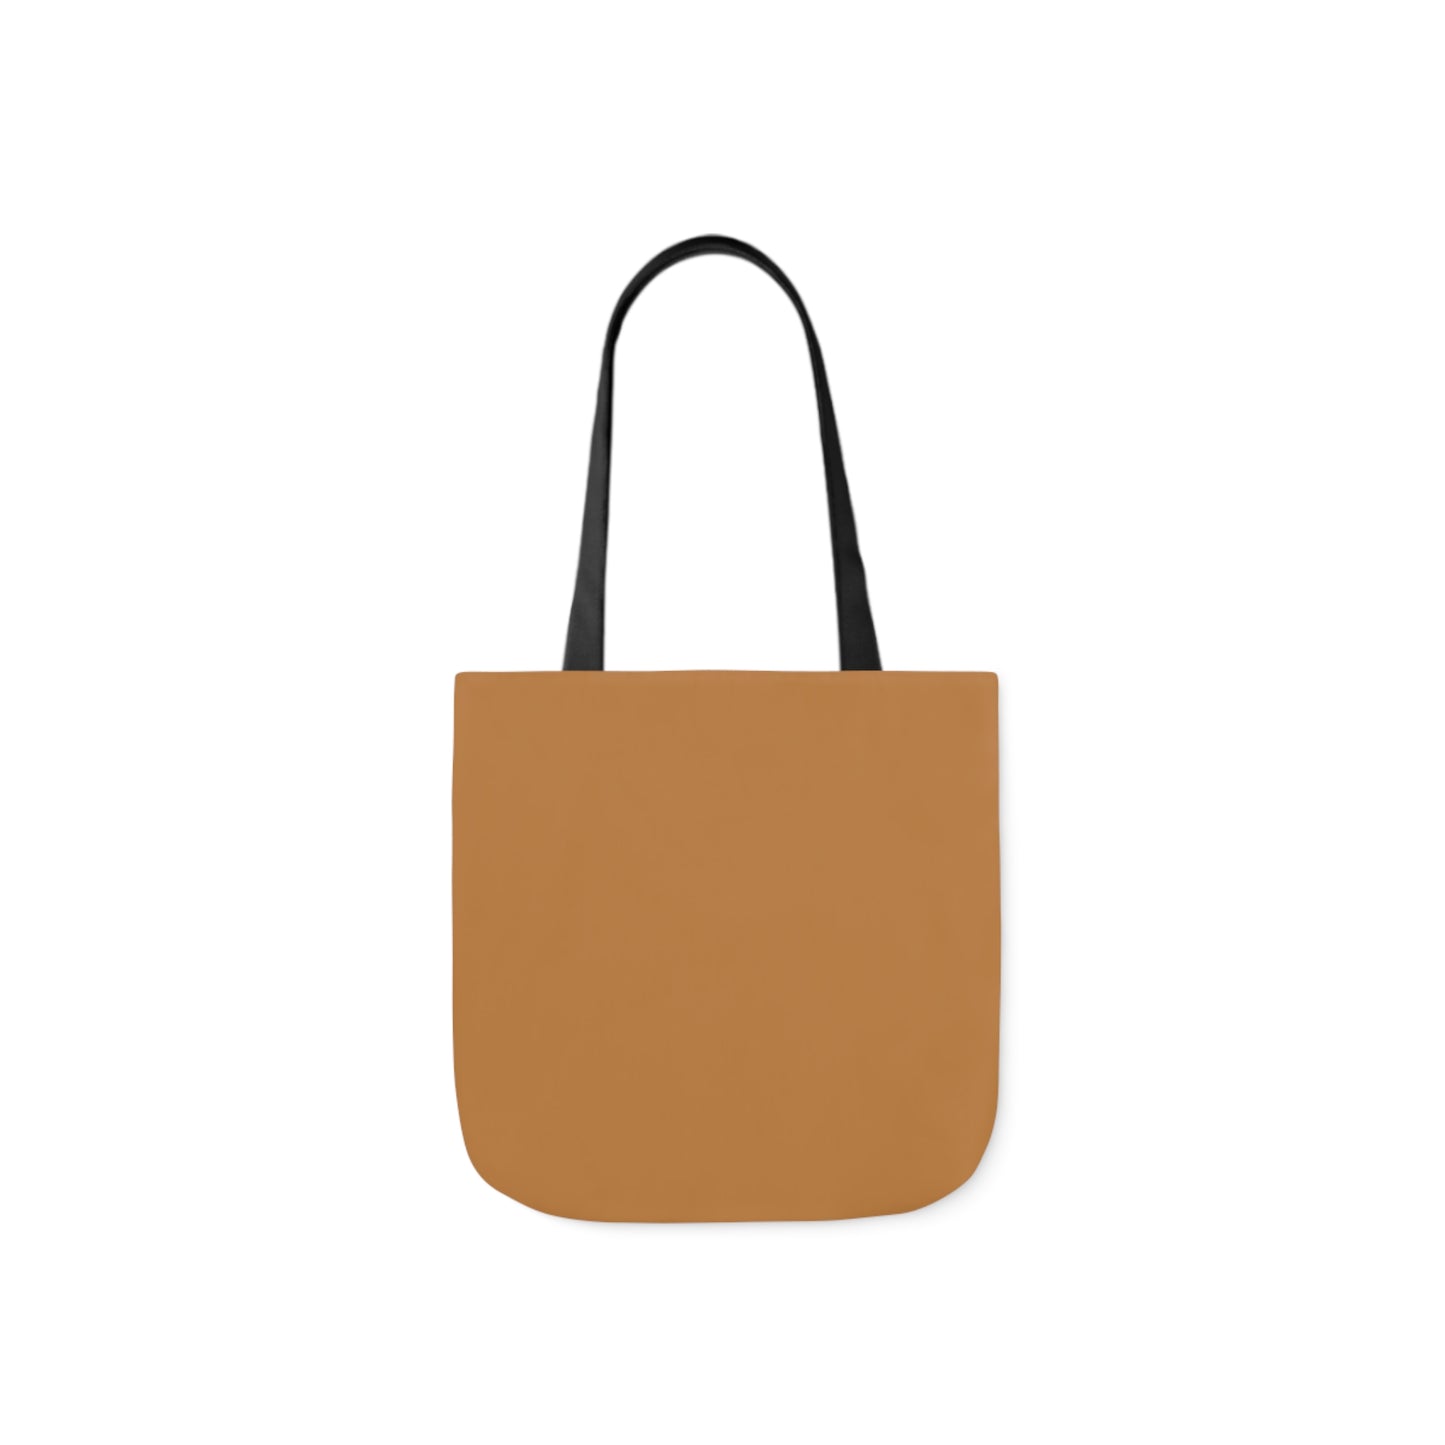 Glimpes Canvas Tote Bag